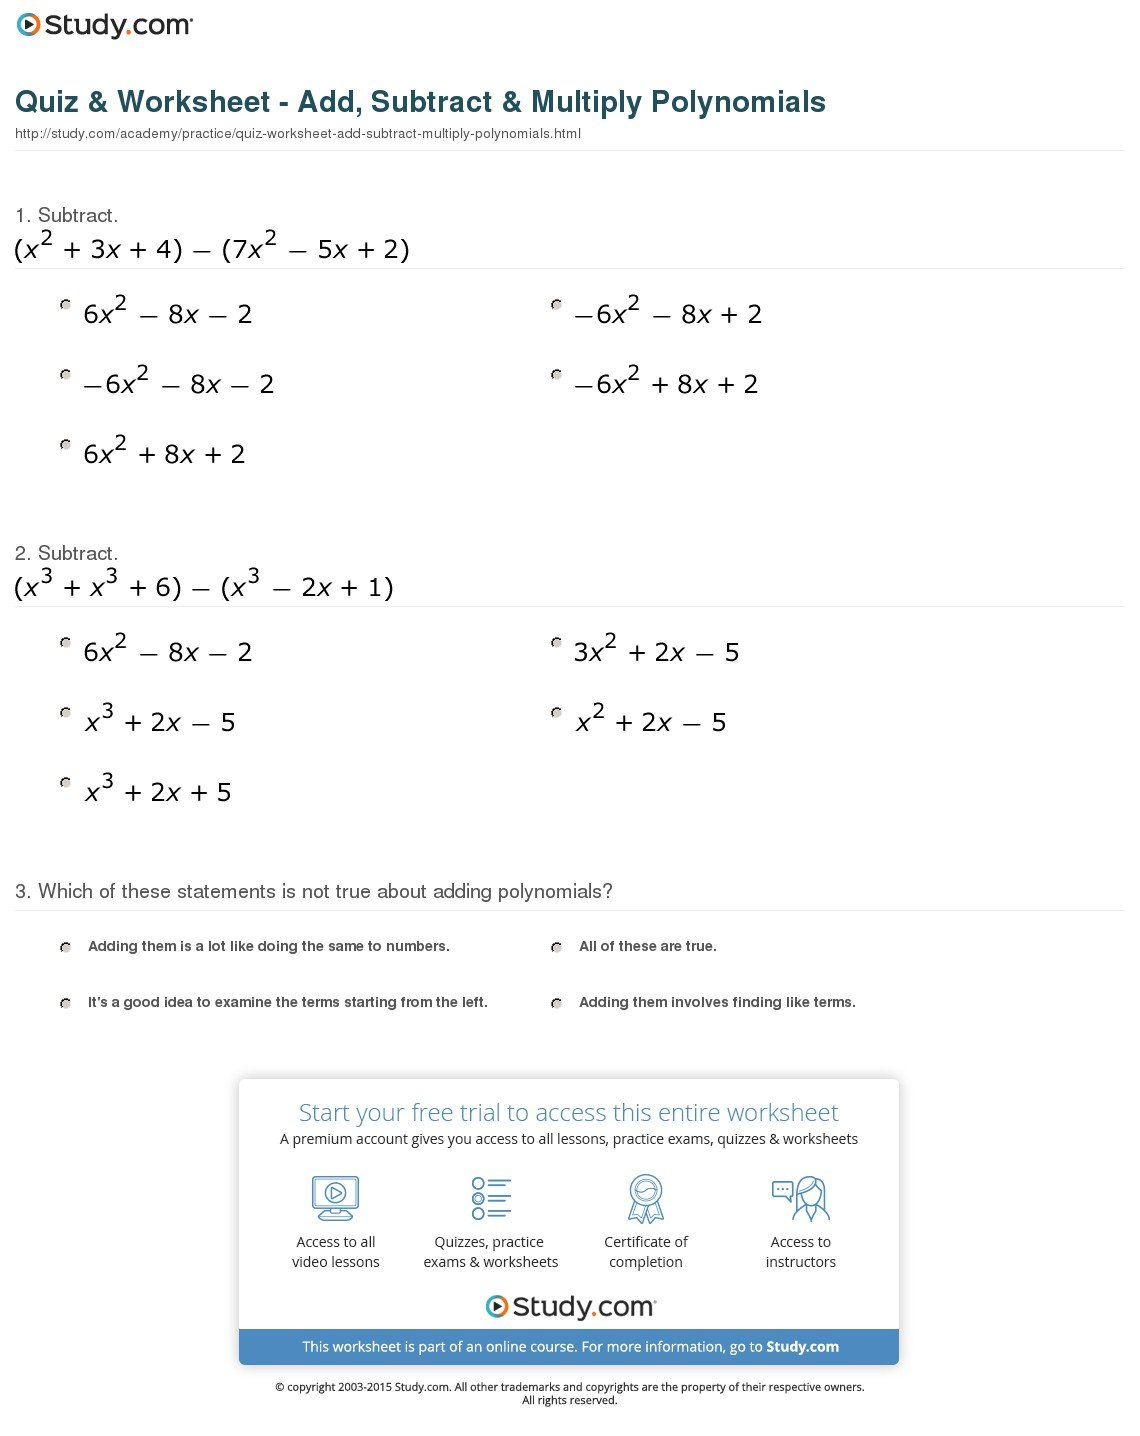 Quiz  Worksheet  Add Subtract  Multiply Polynomials  Study Throughout Operations With Polynomials Worksheet